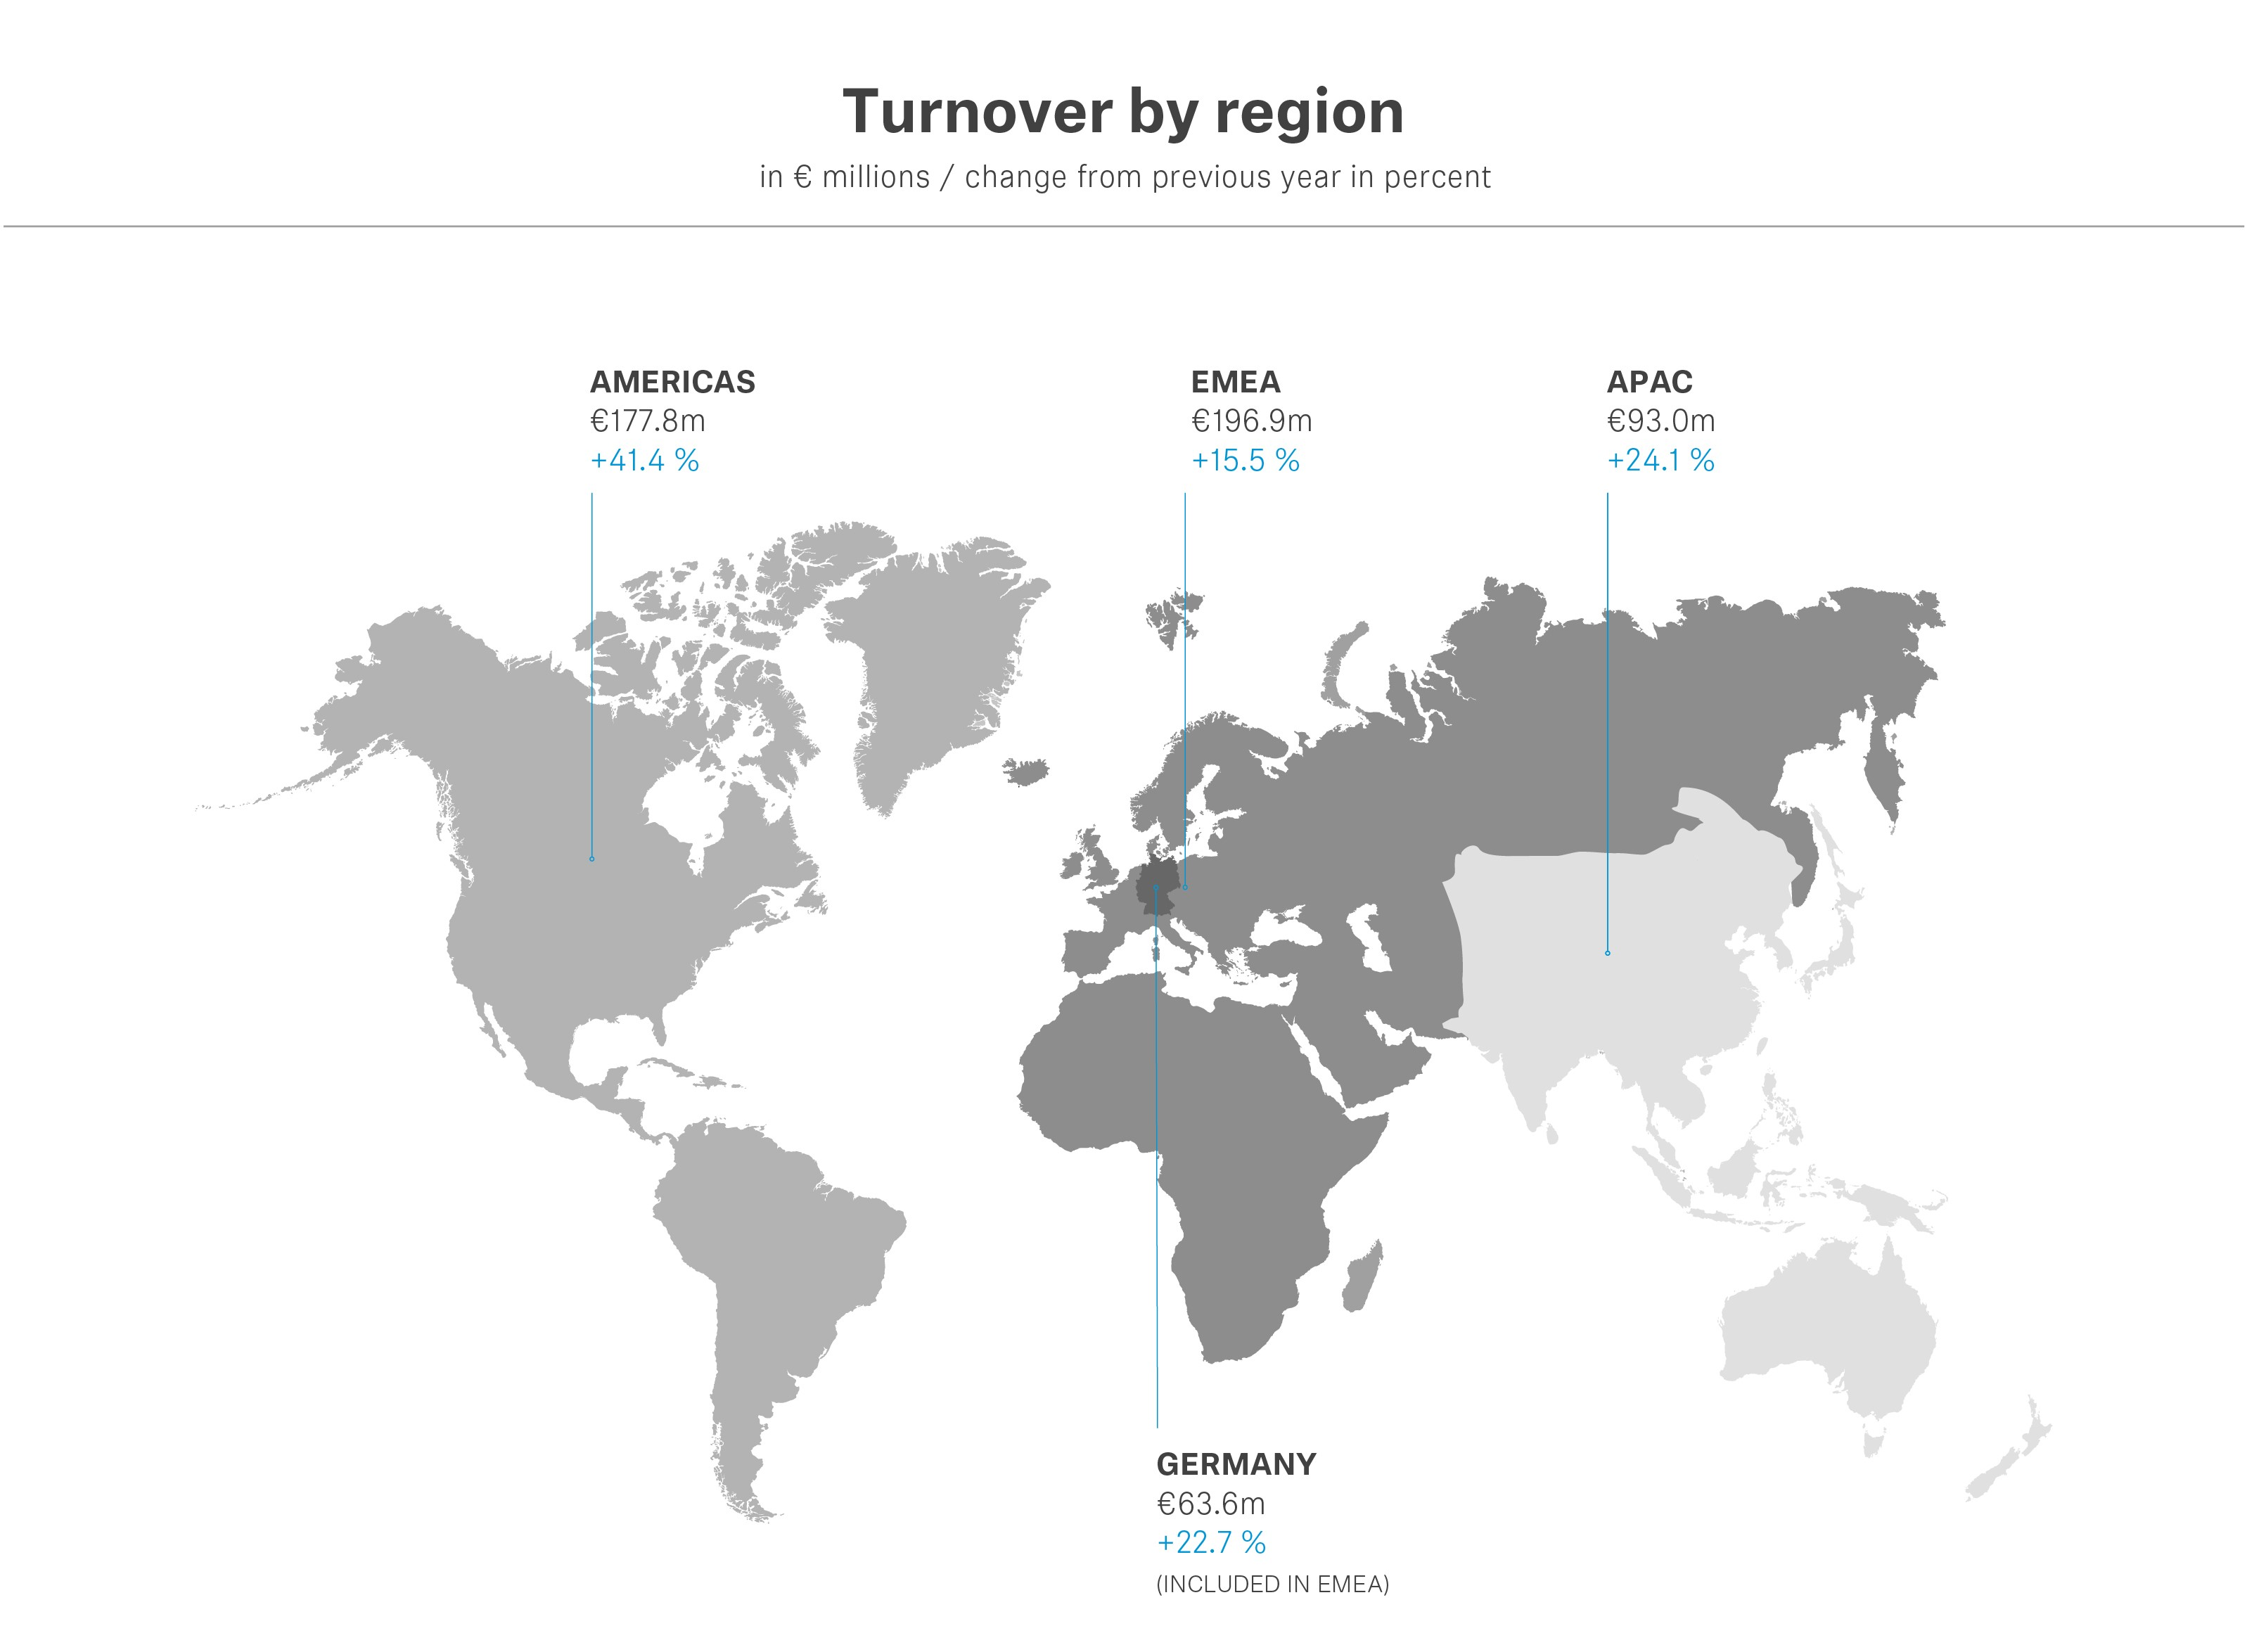 In 2022, the EMEA region continues to be the region with the highest turnover with €196.9 million. In its home market, Germany, Sennheiser generated turnover of 63.6 million and in the Americas region €177.8 million. This excludes turnover from the Consumer segment.